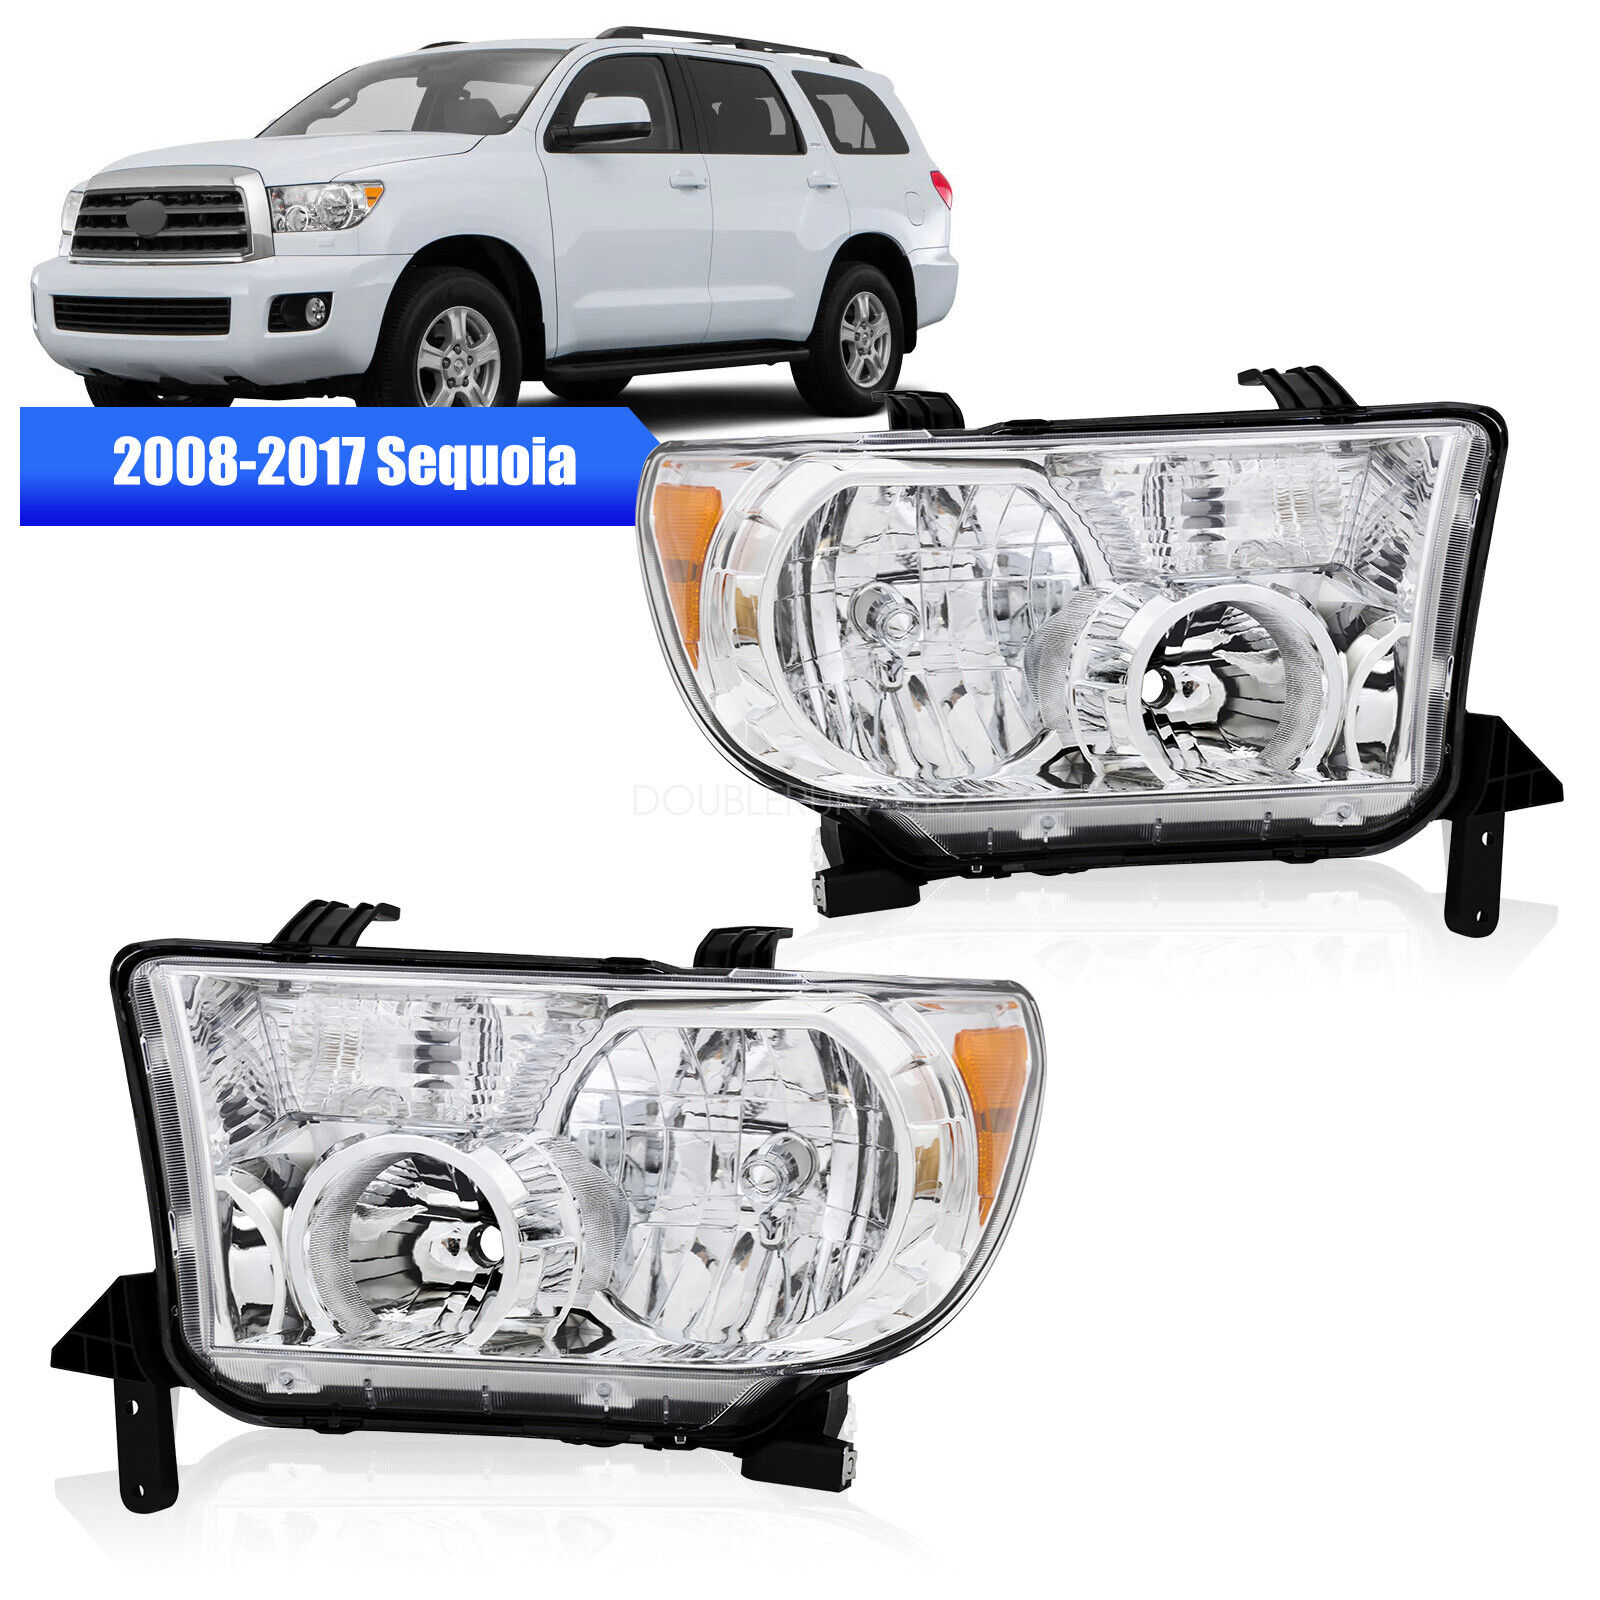 Headlights For 2007-2013 Toyota Tundra 2008-2017 Sequoia Clear Lens Right Left